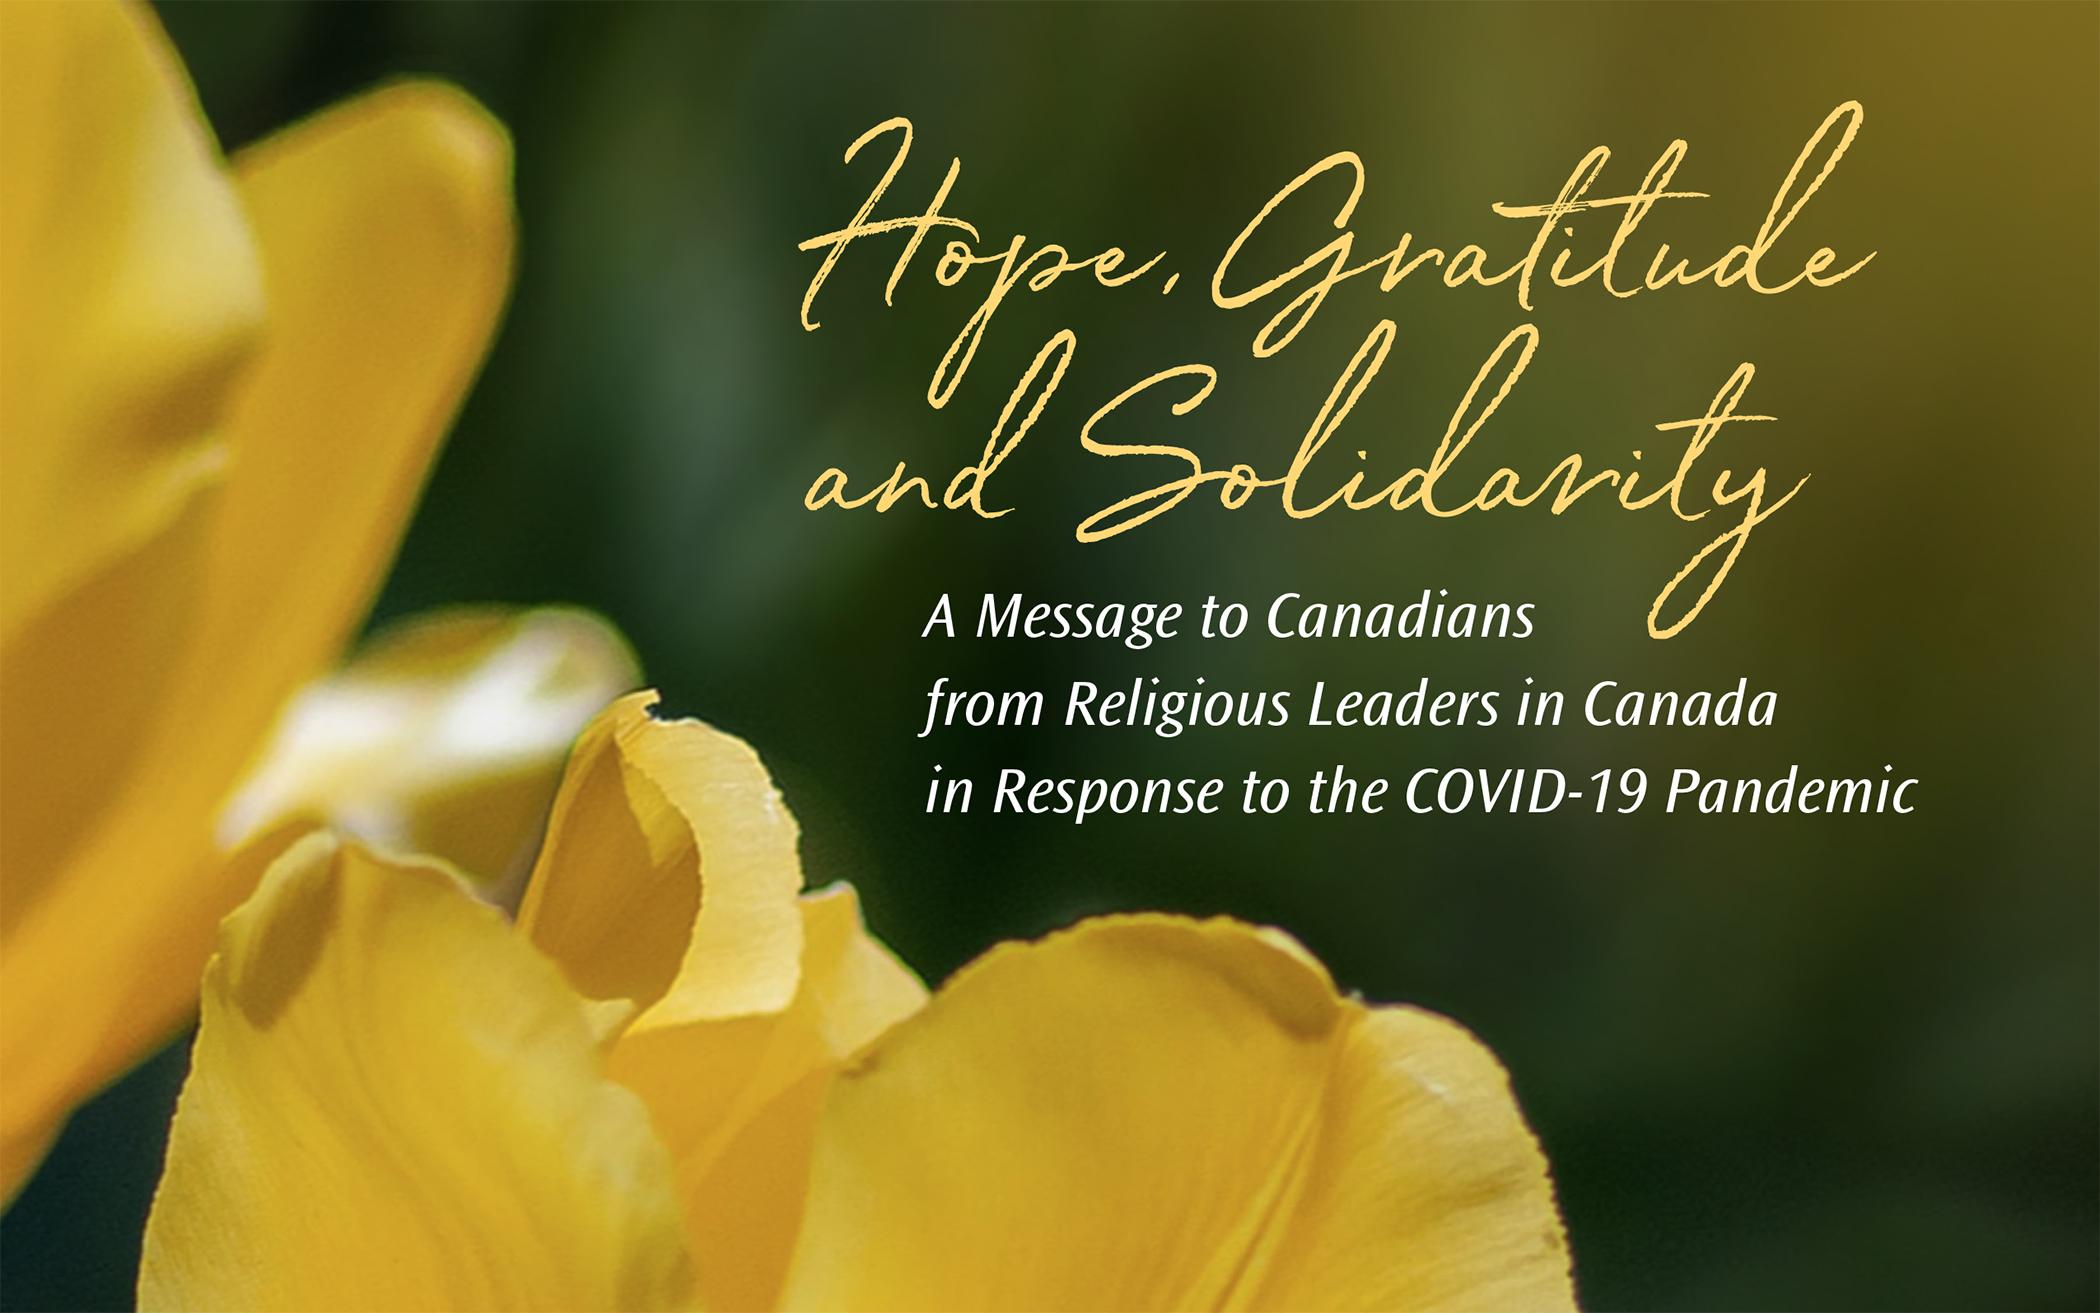 Canadian Faith Leaders Release Message of ‘Hope, Gratitude, and Solidarity’